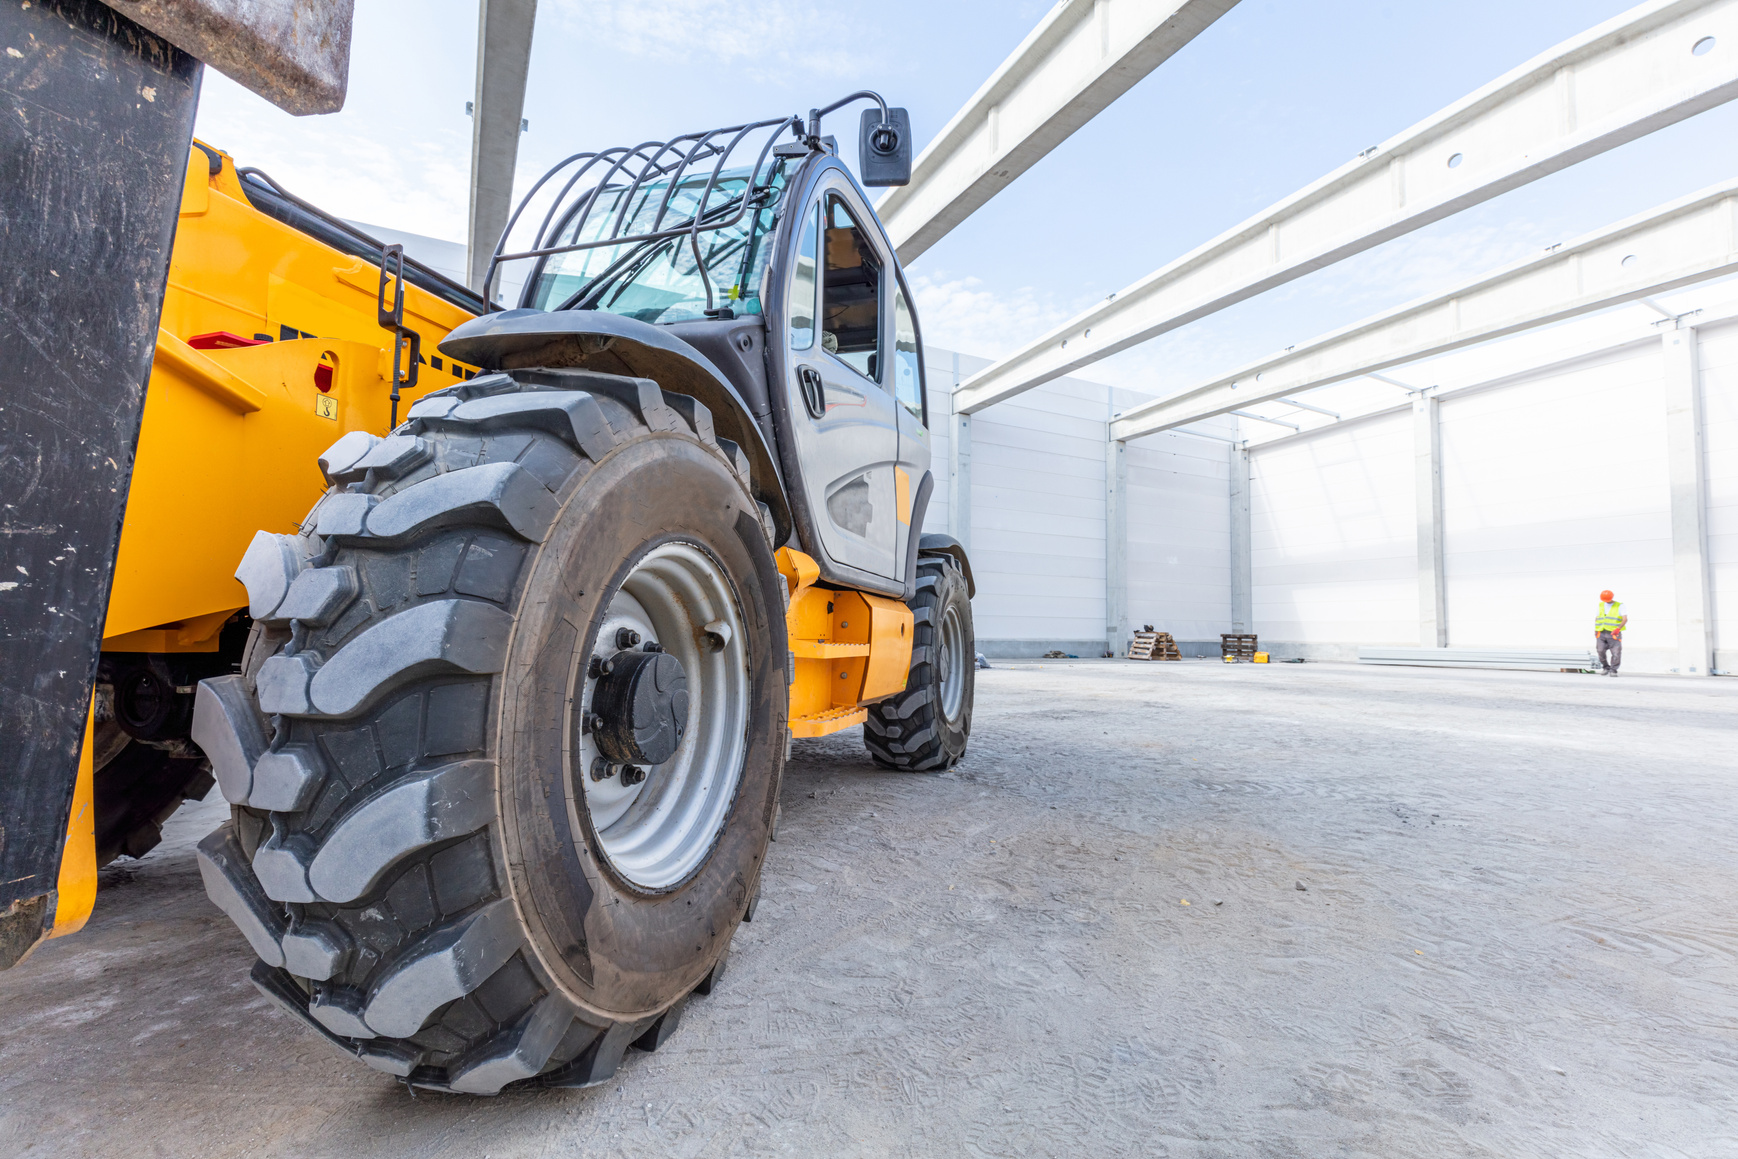 Rotating Telehandler Vehicle in a Factory